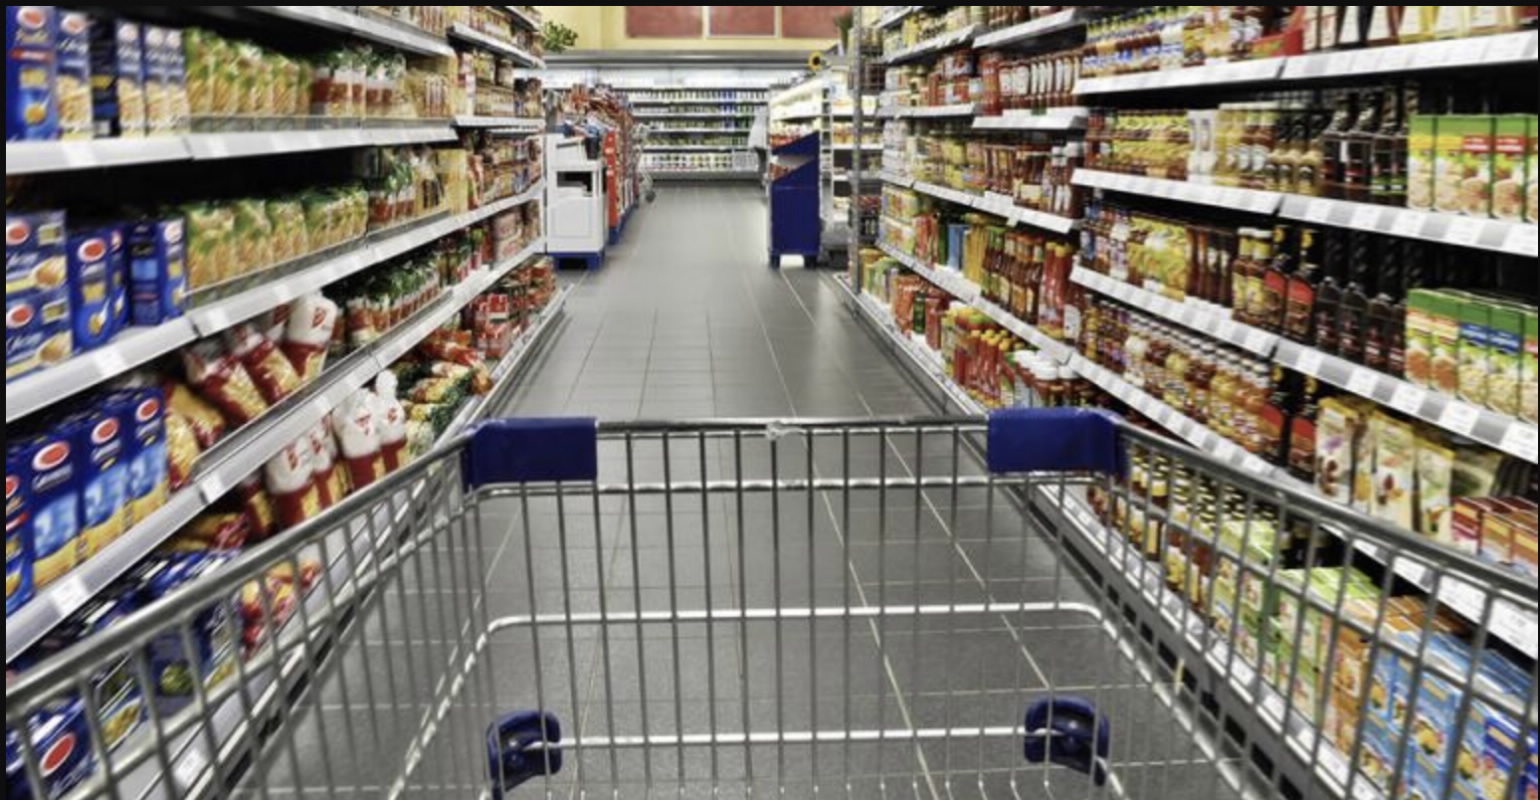 Grocery shopping with cart